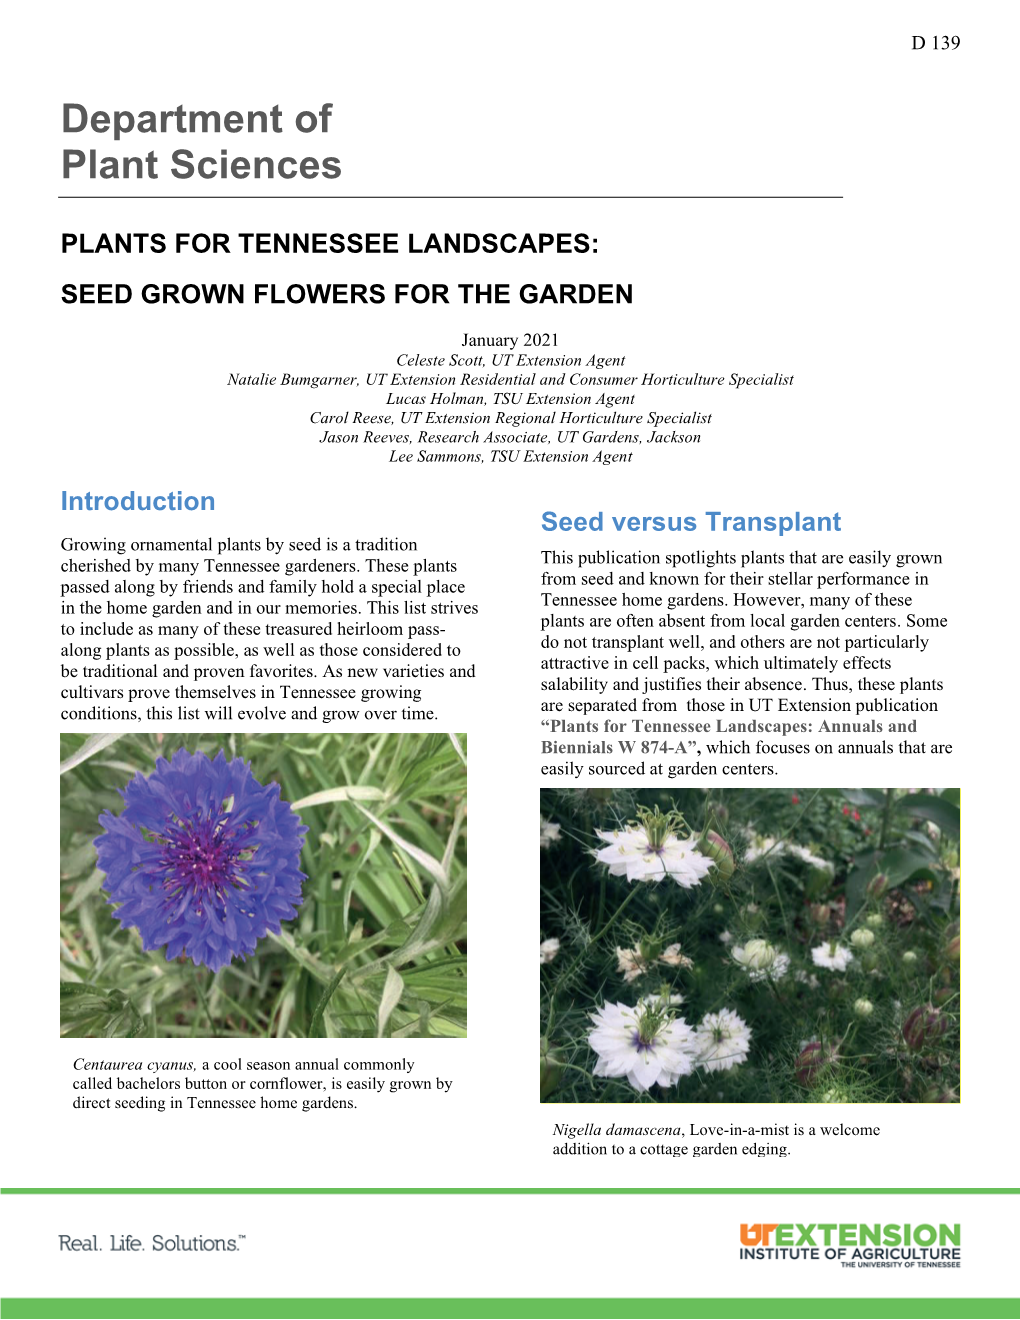 Plants for Tennessee Landscapes: Seed Grown Flowers for the Garden